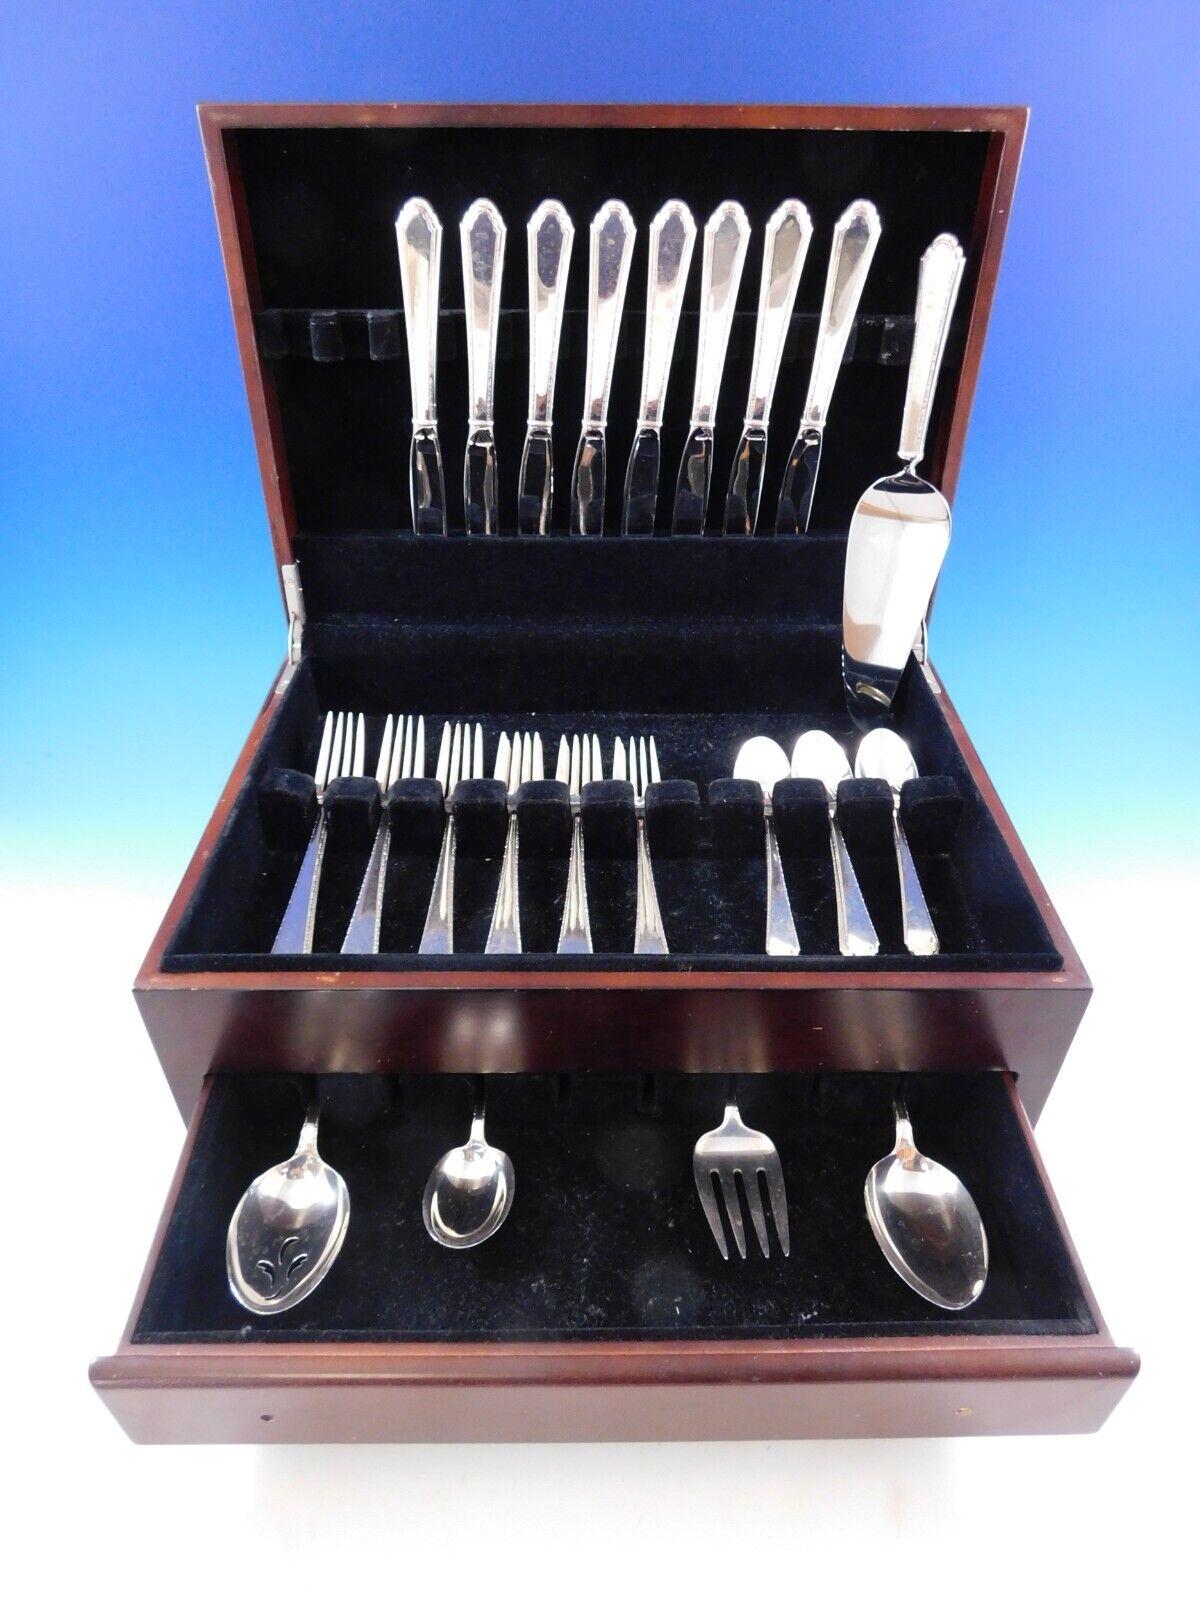 Located in beautiful Western Massachusetts next to the Berkshire Mountains, Lunt Silversmiths began its existence in 1882 when Anthony Towle and George Lunt began a partnership to produce the finest sterling silver flatware and gifts. Within 20